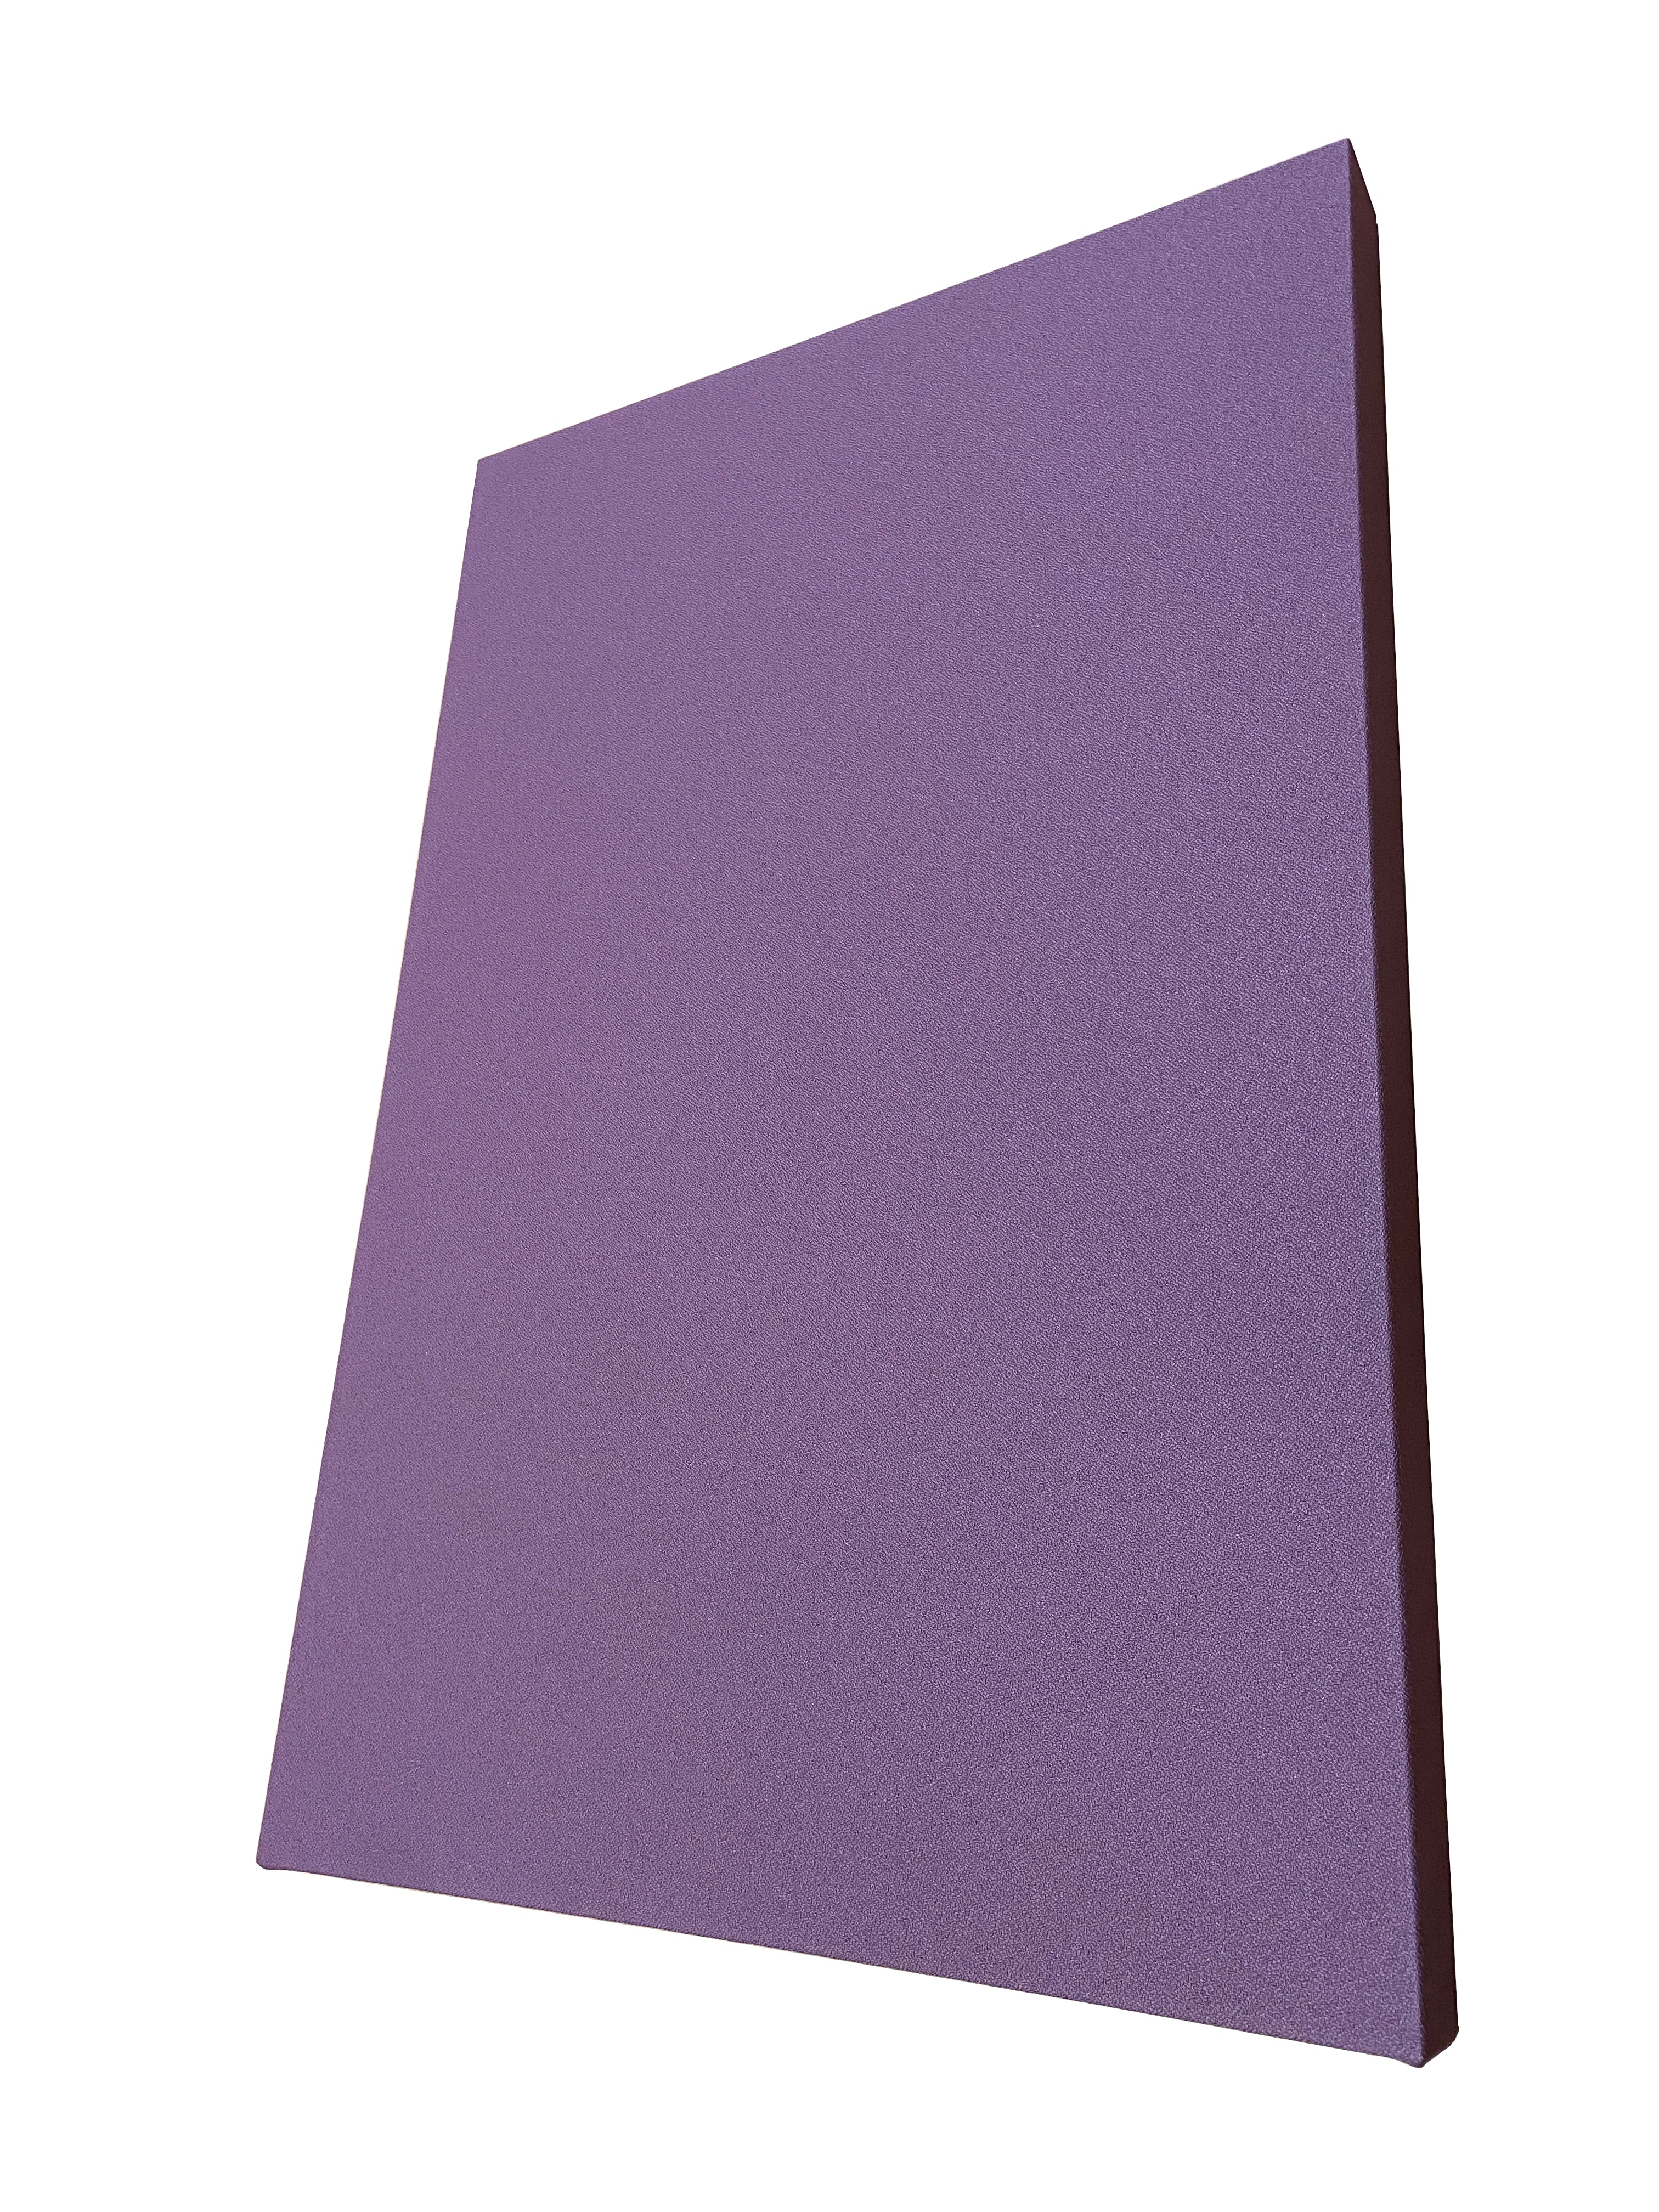 2" SoundControl Ceiling Suspended Acoustic Panel 2ft by 3ft